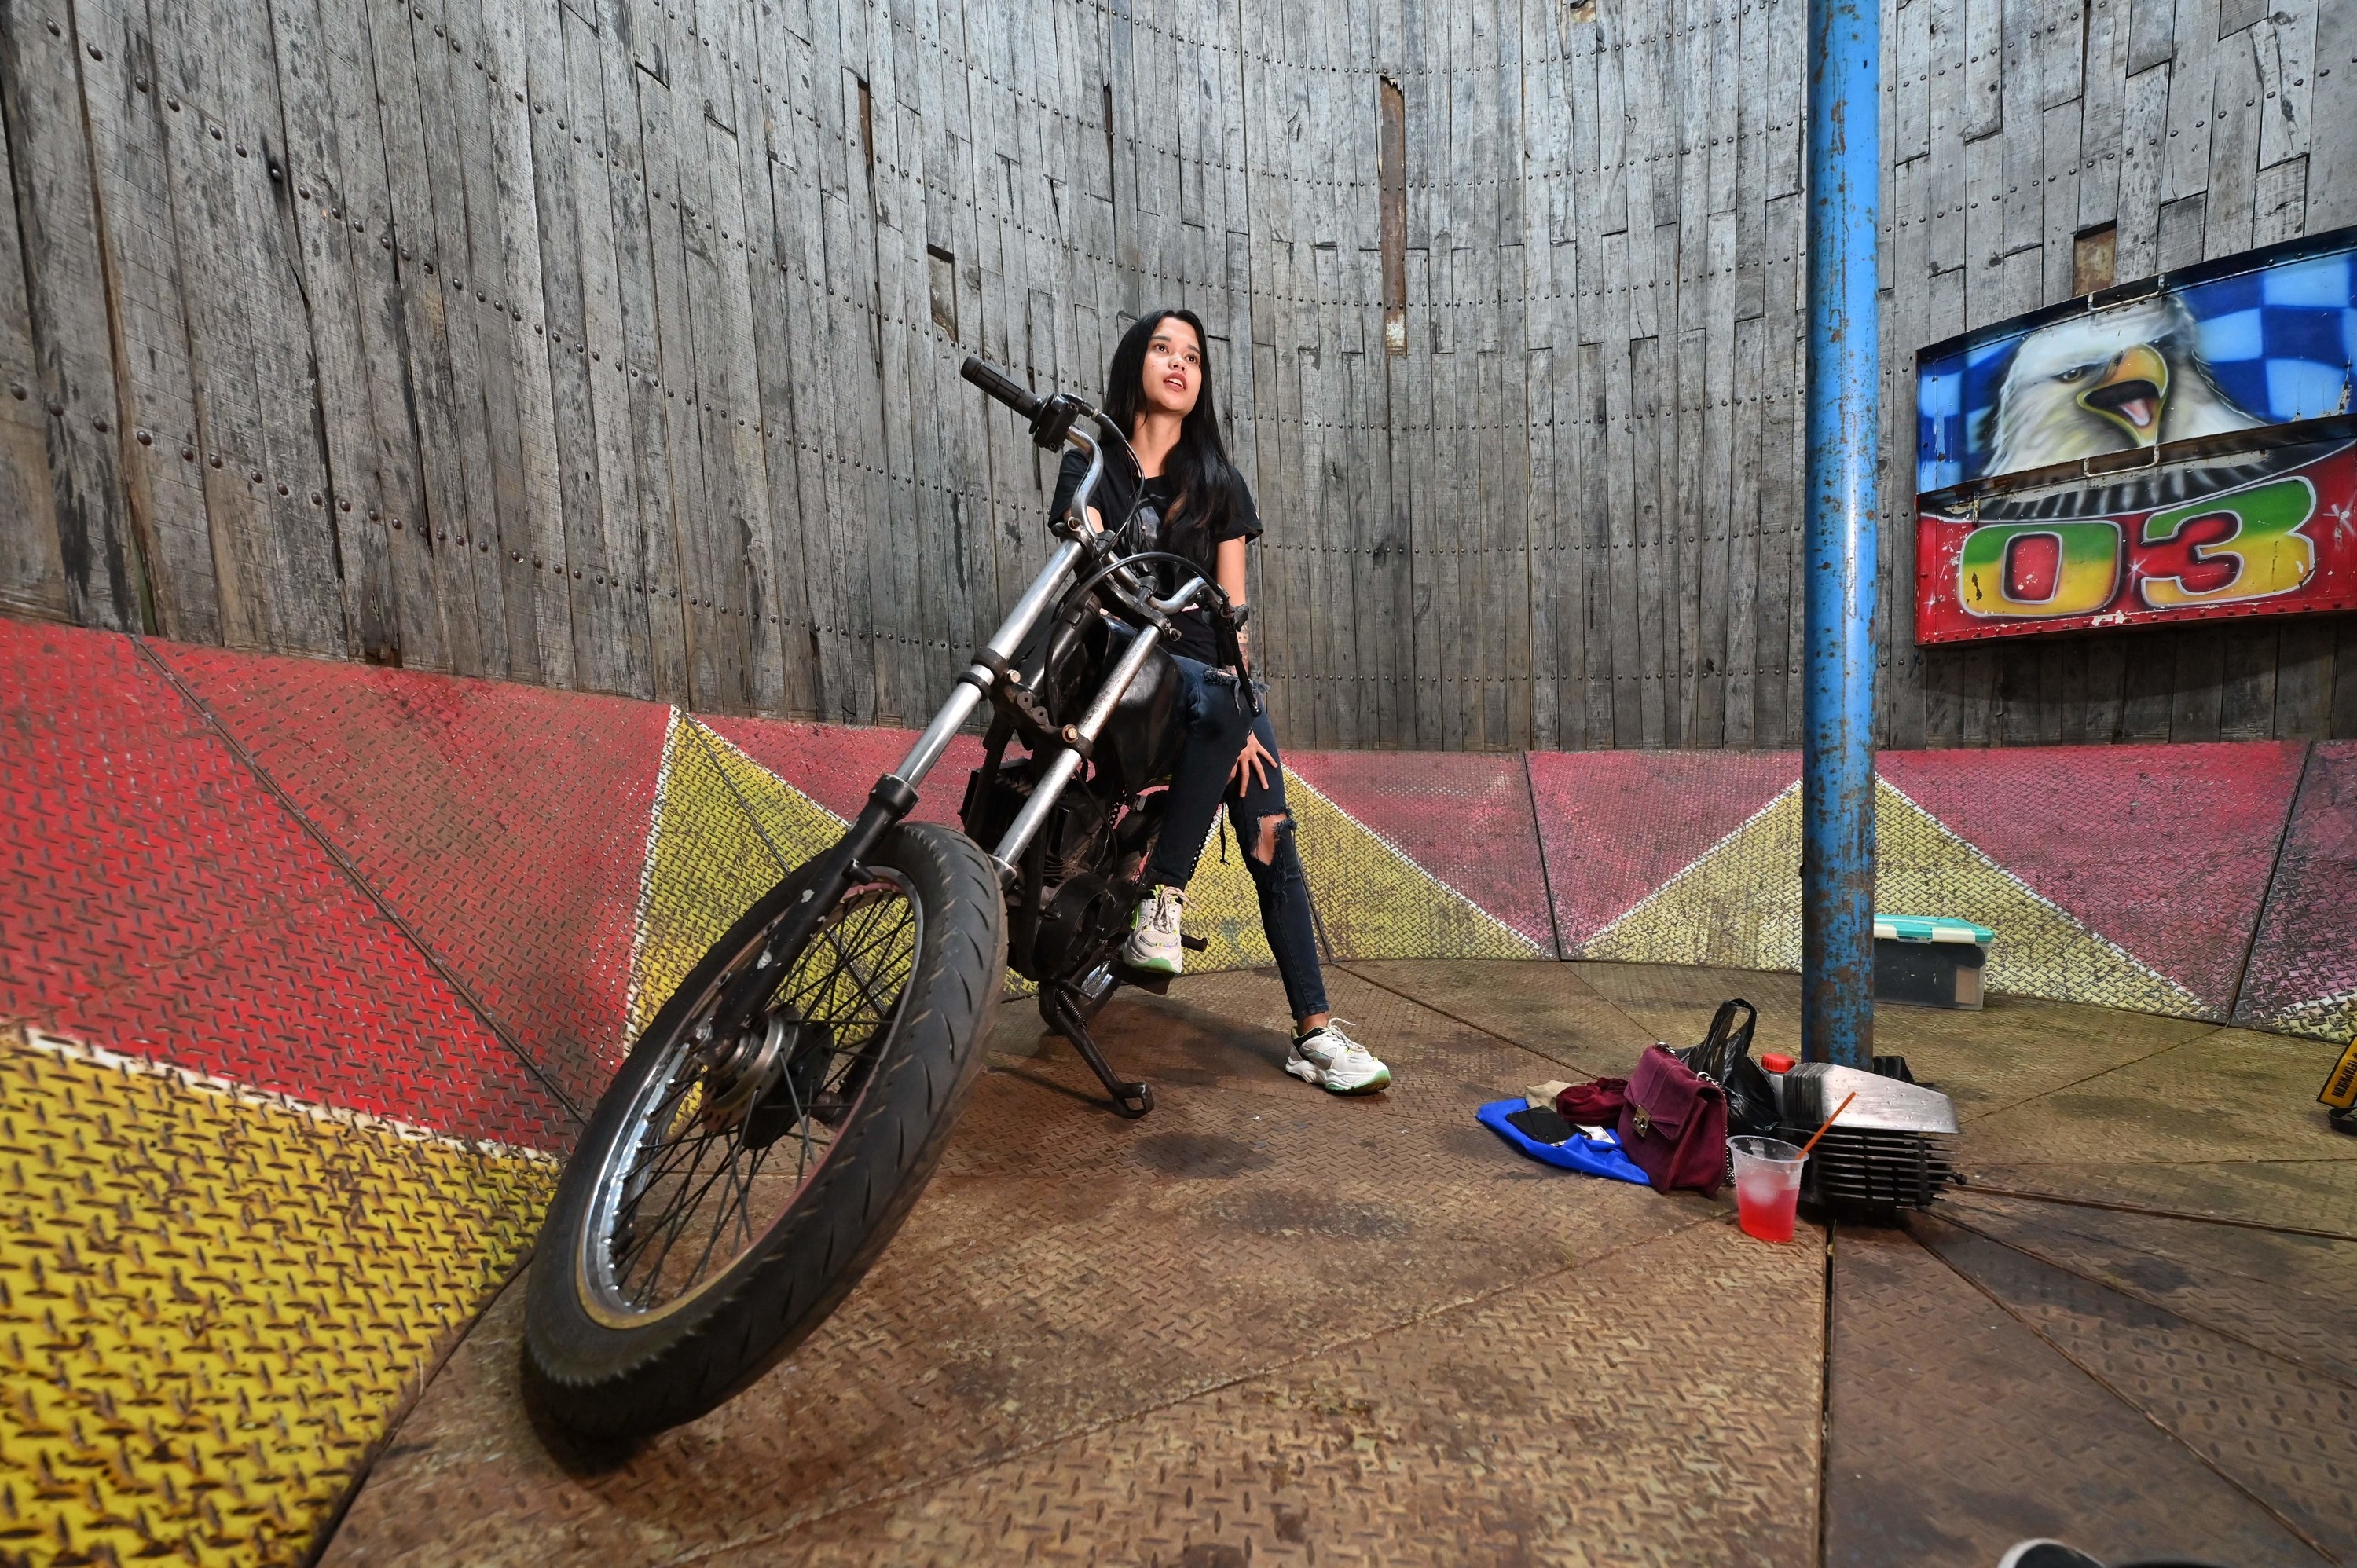 Karmila Purba, a 23 year old daredevil, sitting on a motorcycle resting at the bottom of a &quot;Well of Death.&quot; 